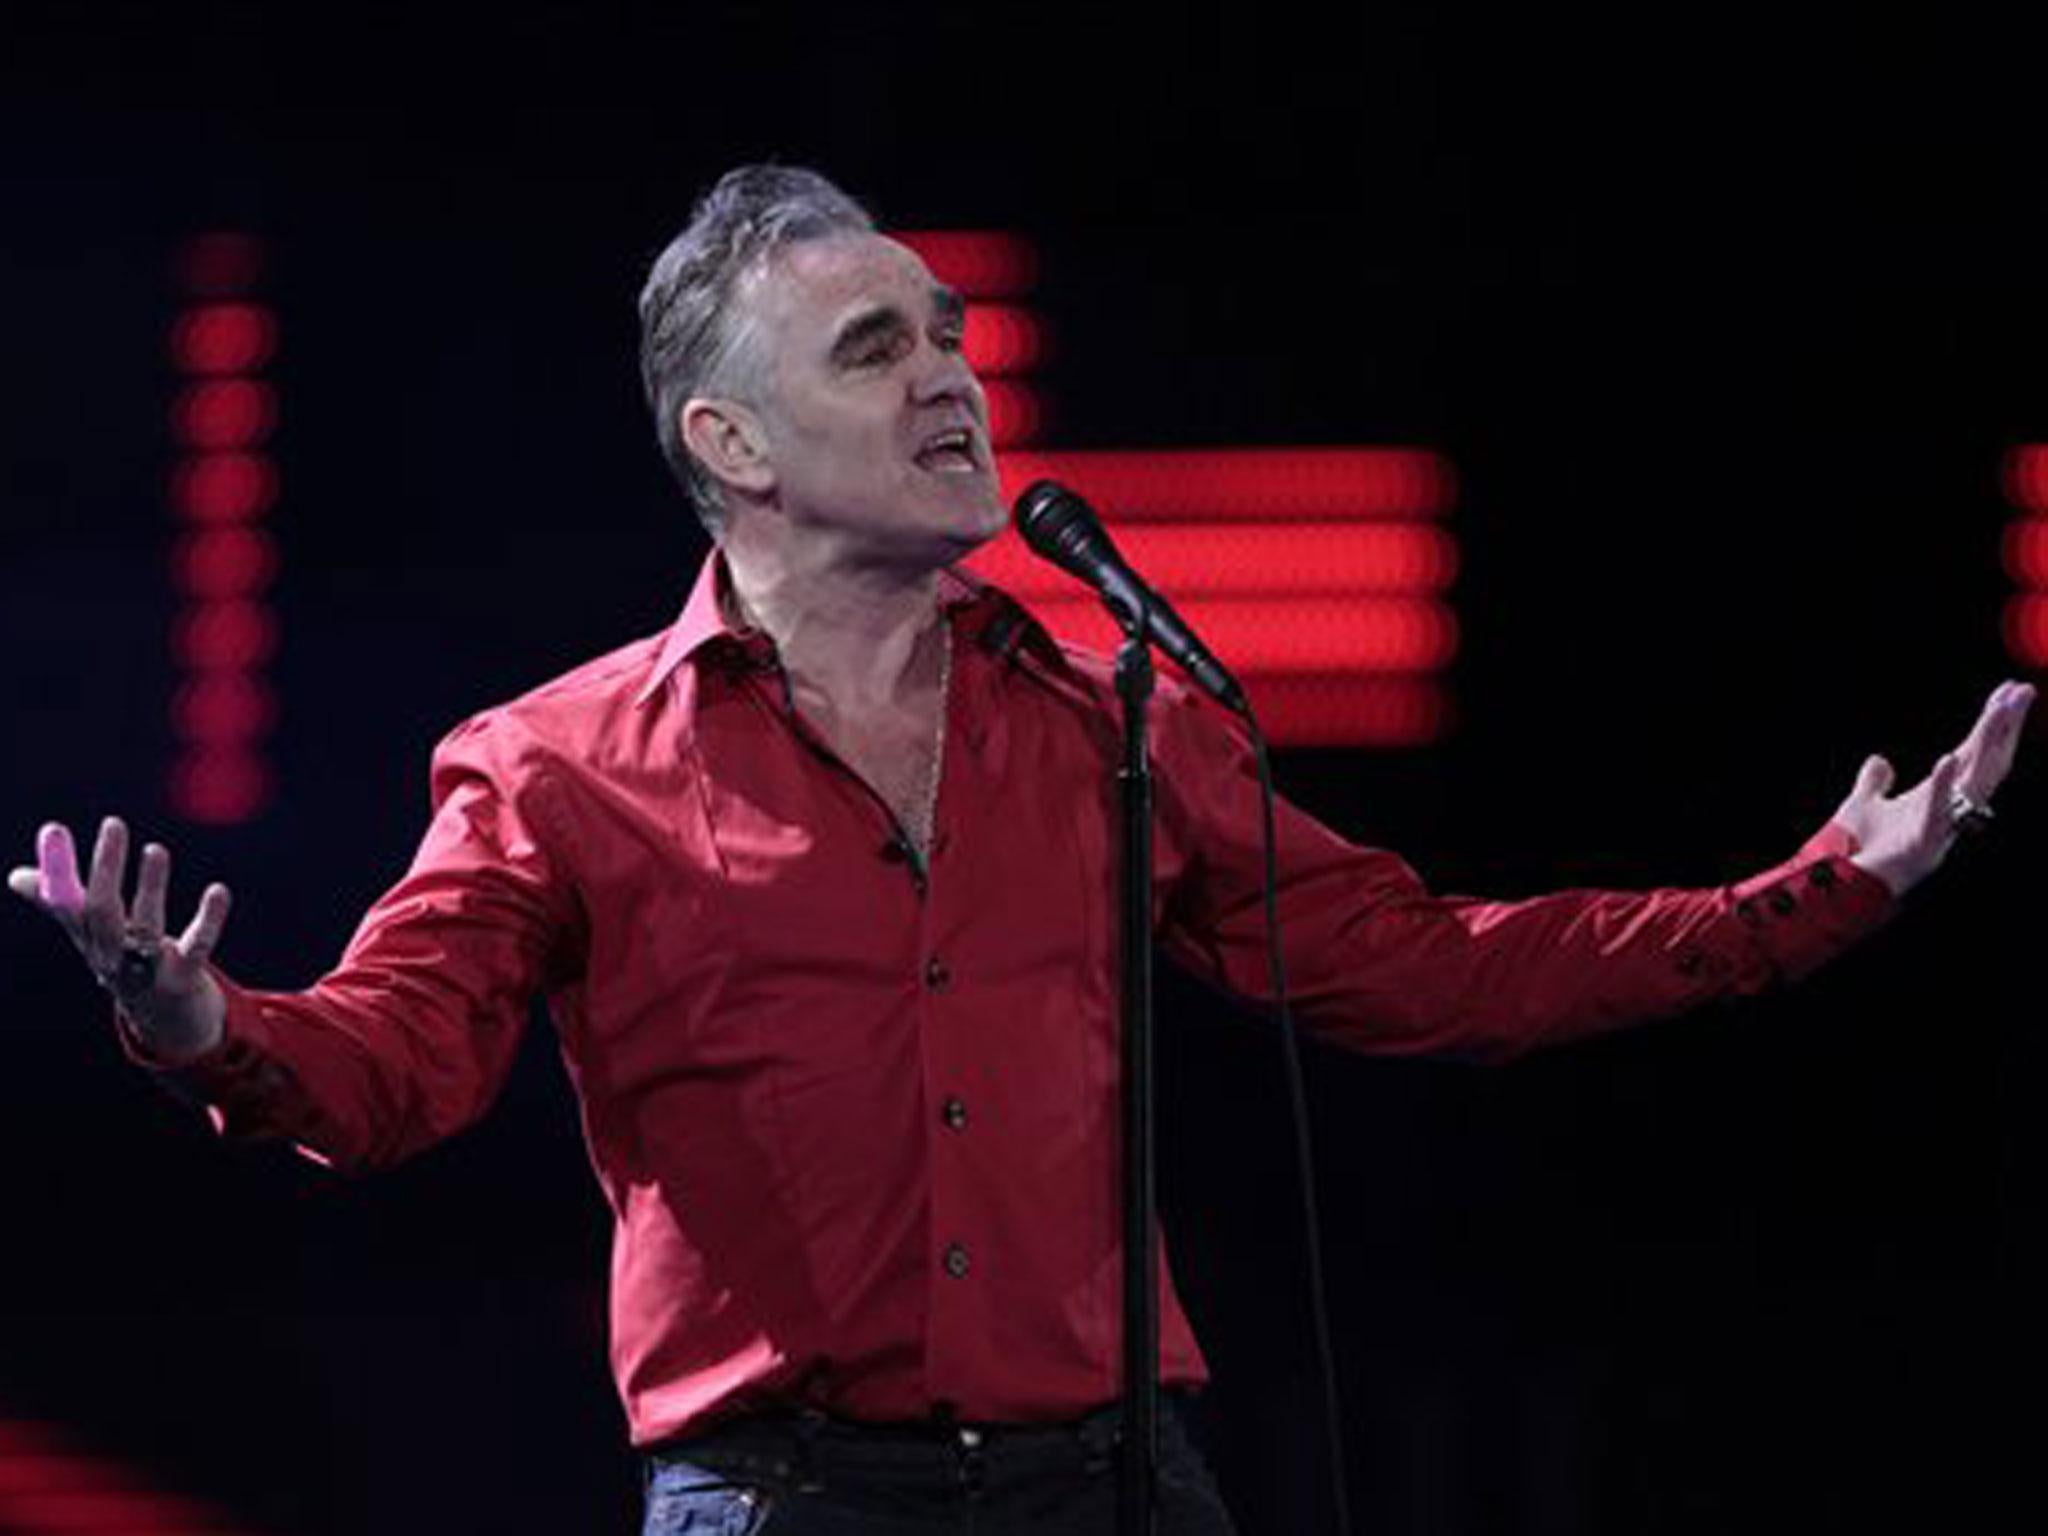 Morrissey's biography was controversially published by Penguin Classics